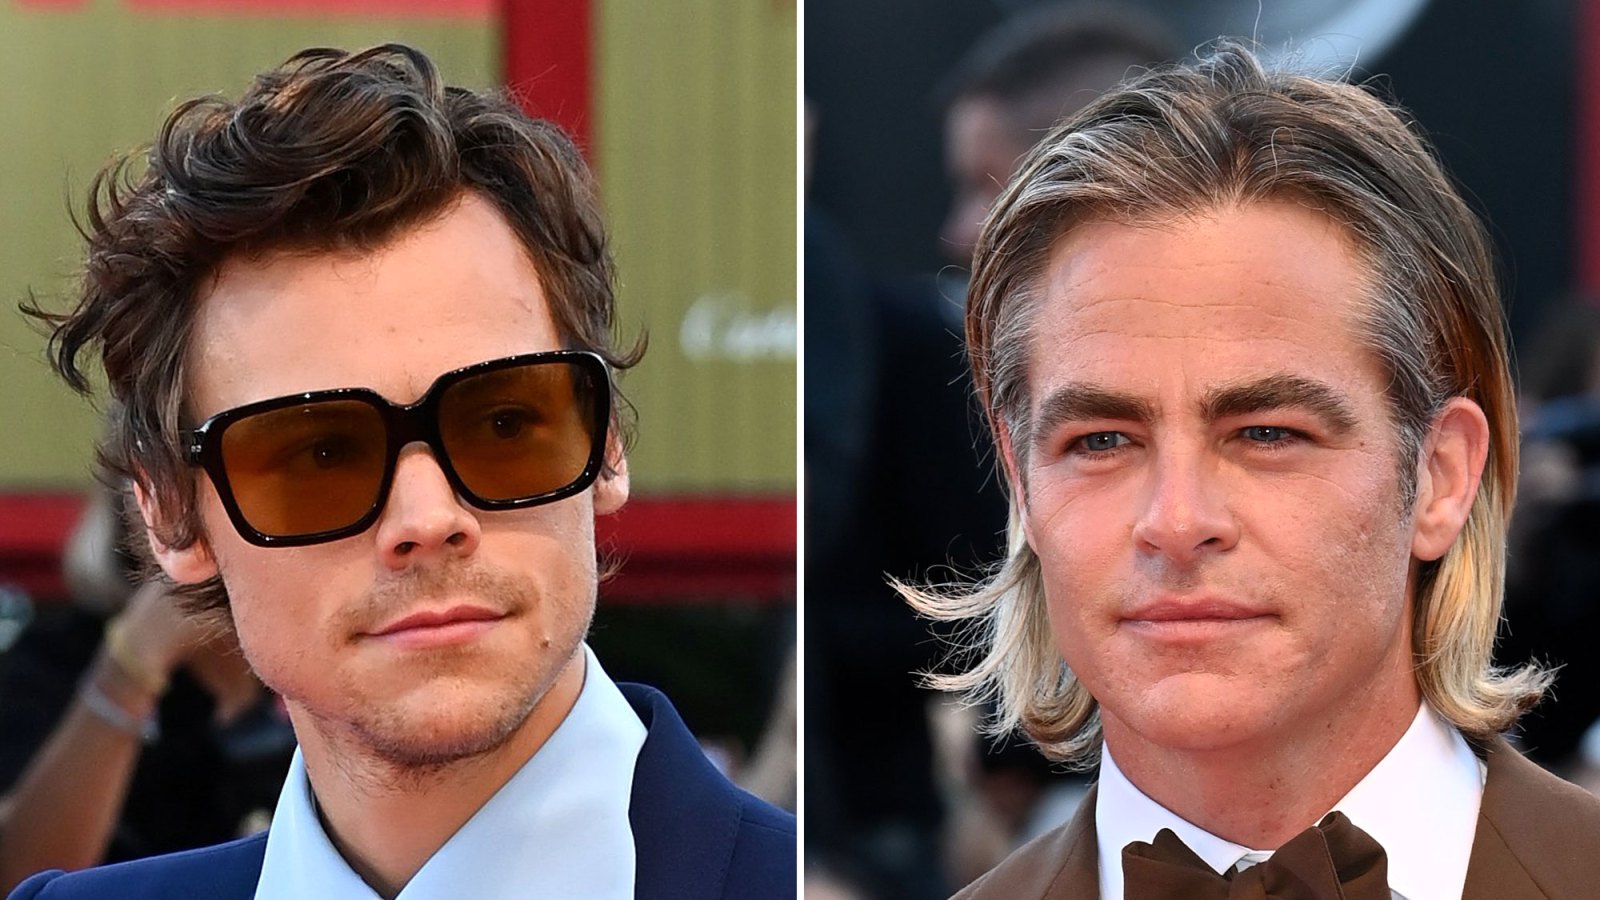 Harry Styles Allegedly Spits on Chris Pine Don’t Worry Darling Premiere